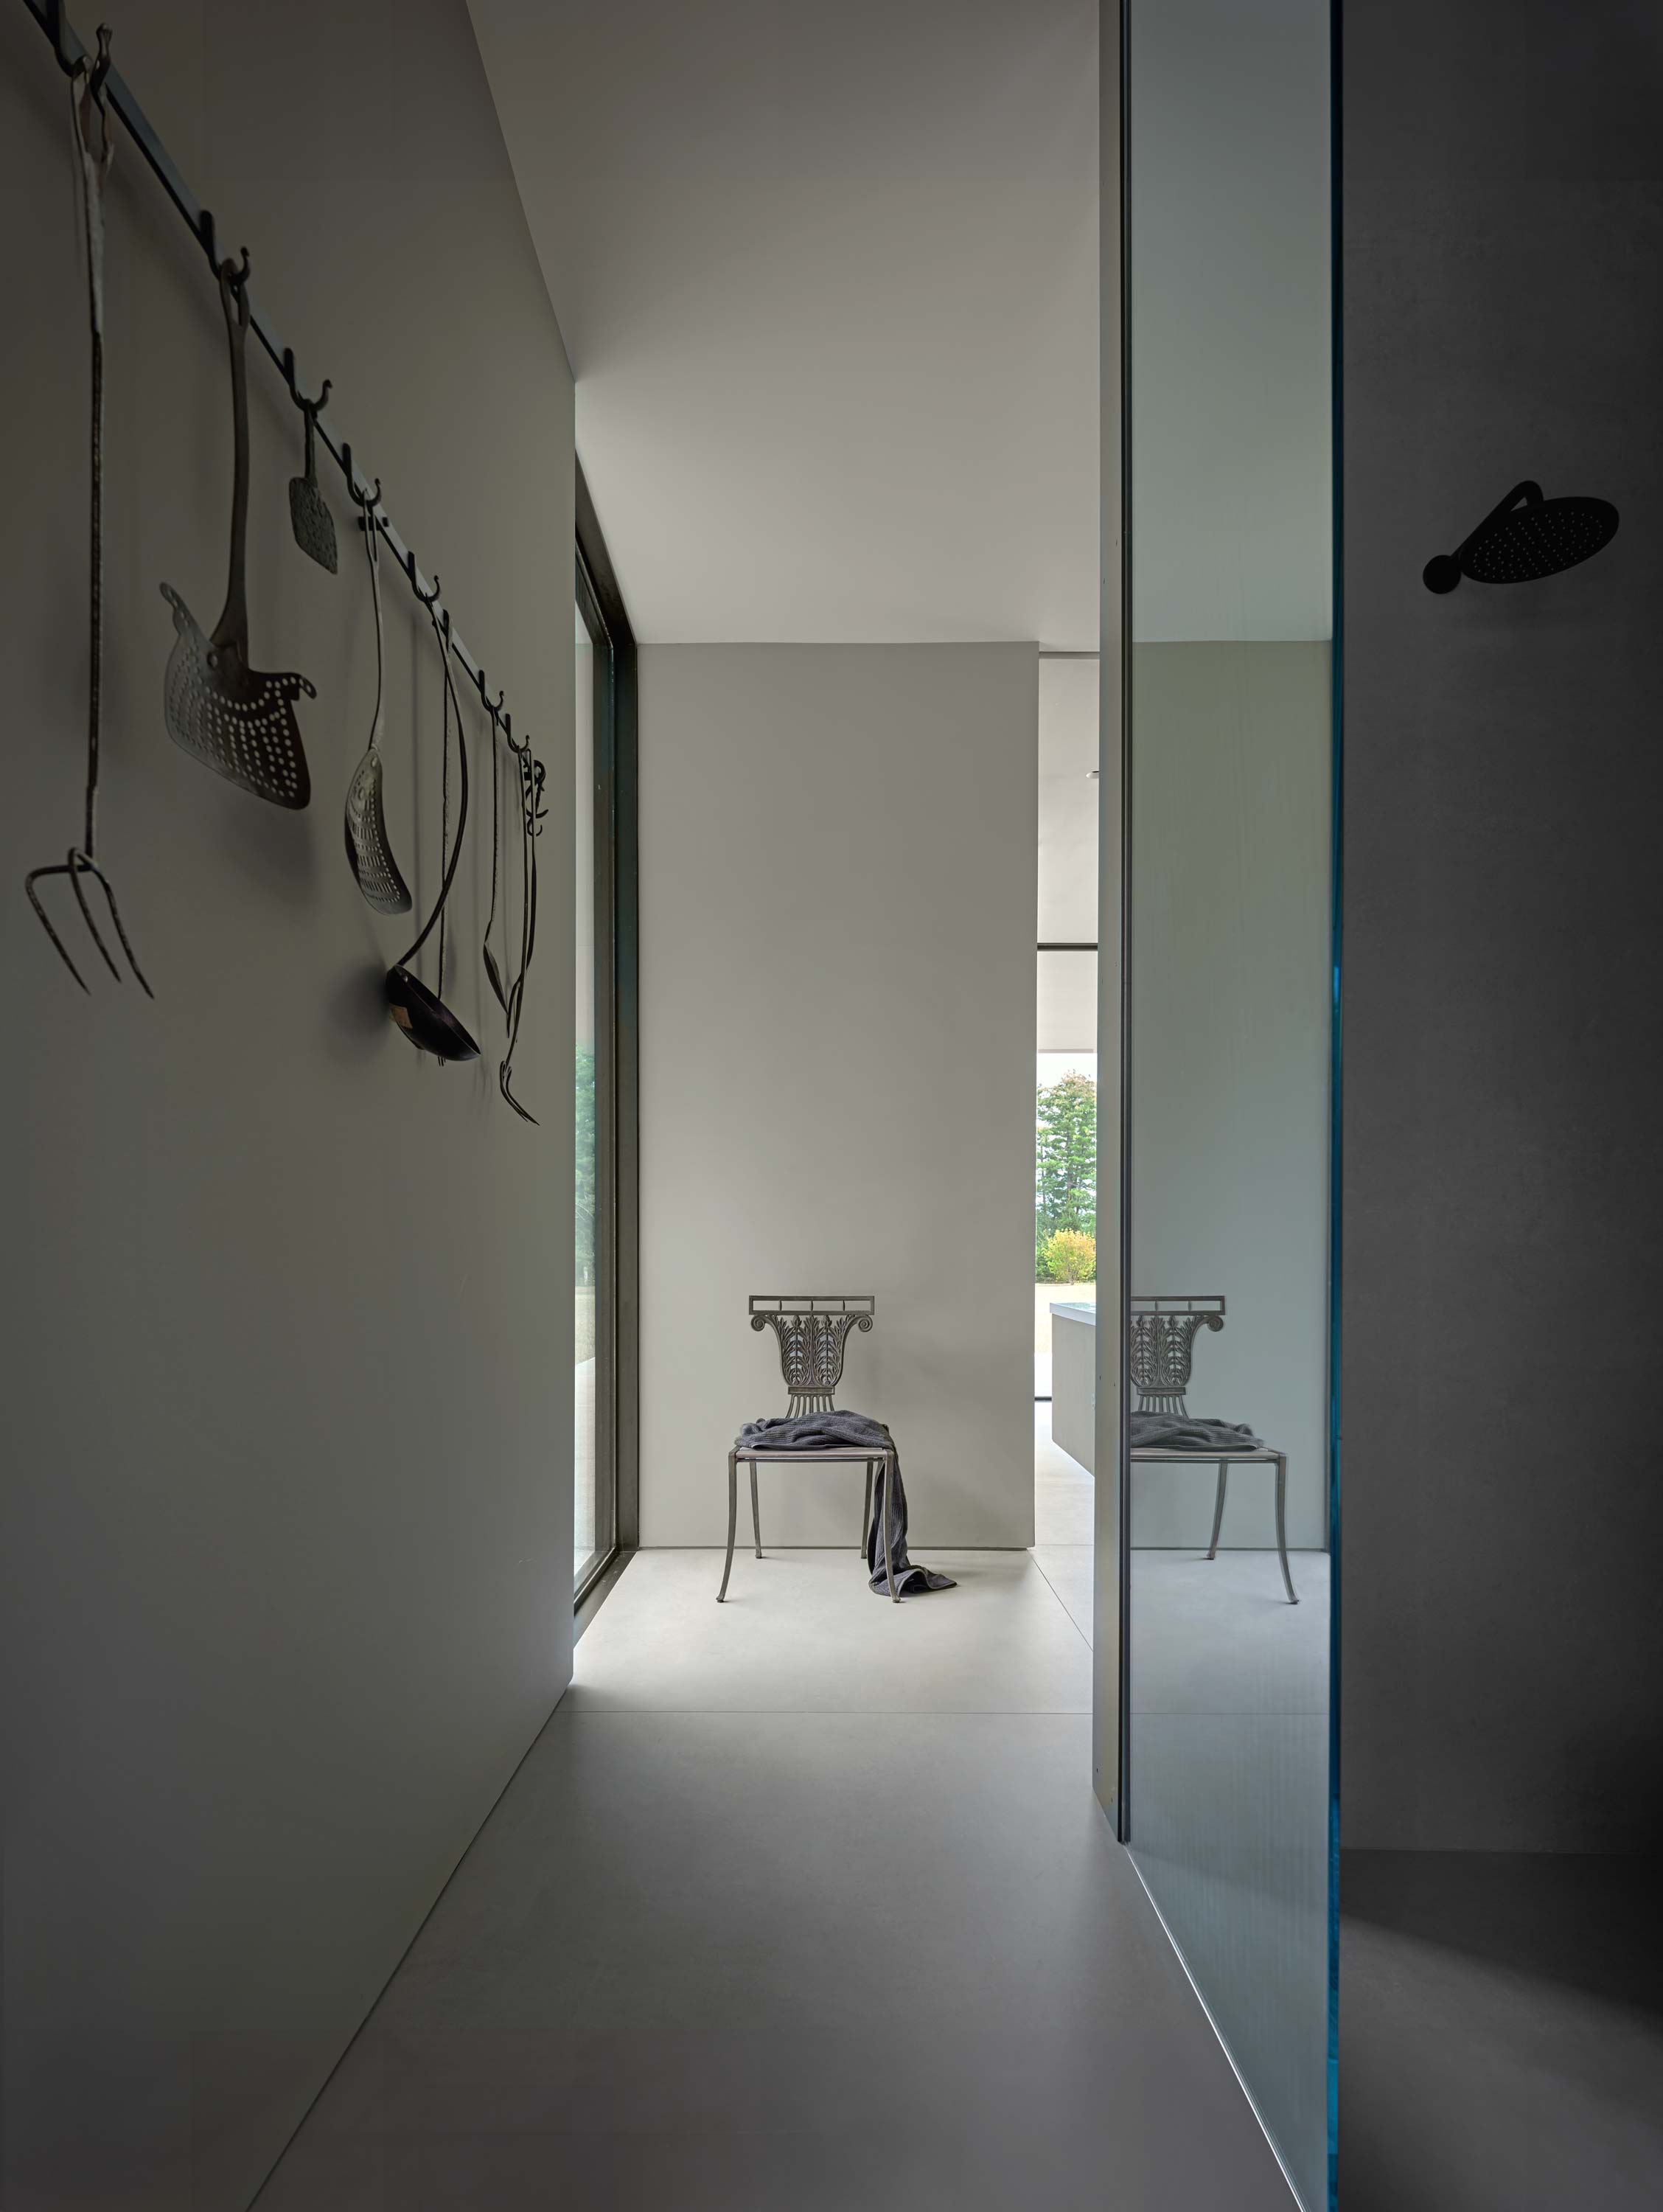 Interior photo of the Casa Annunziata Residence by Specht Novak Architects. Shot by Dror Baldinger, featuring an intimate hallway with a shower to the right and a bedroom entrance at its end.